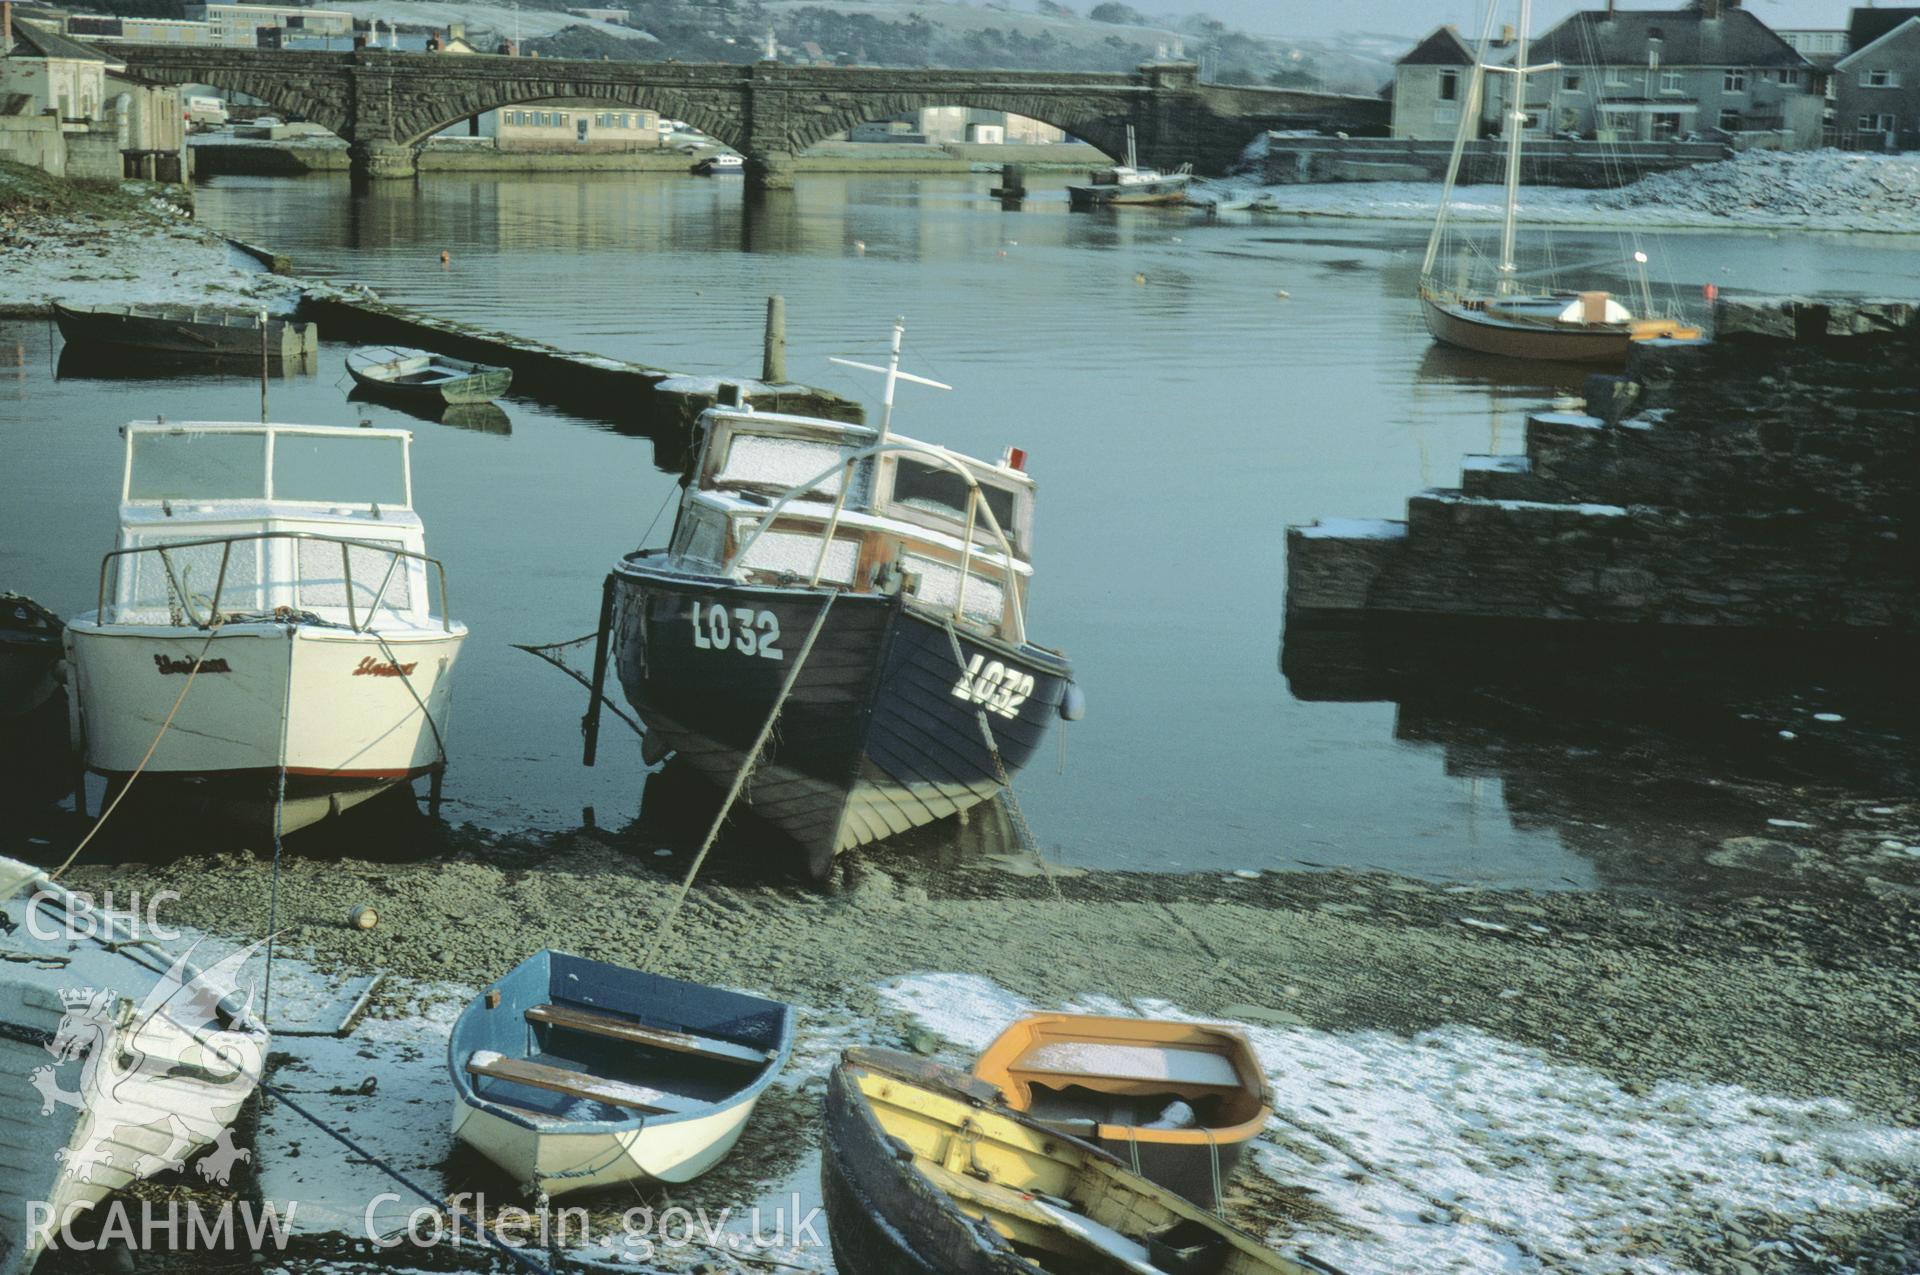 35mm colour slide of Aberystwyth Harbour, Cardiganshire by Dylan Roberts.